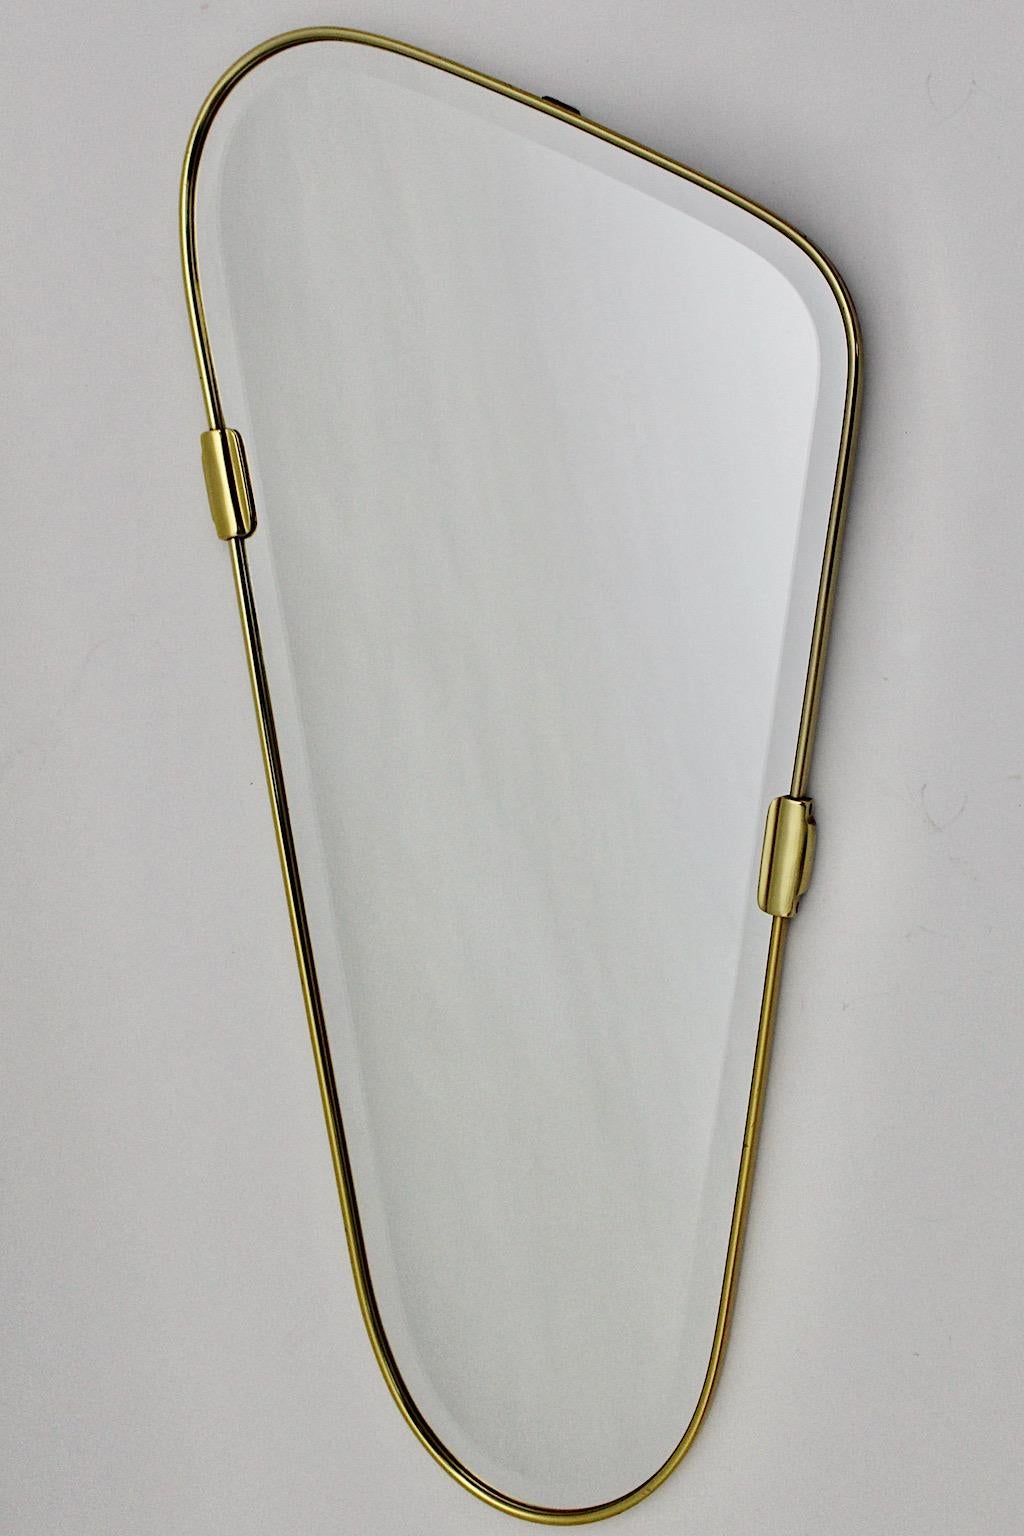 Mid Century Modern vintage oval wall mirror from brass and facetted mirror glass 1950s Italy.
Amazing wall mirror with thick solid brass frame and two brass clasps as decor, while the renewed mirror glass shows an elegant facetted high quality